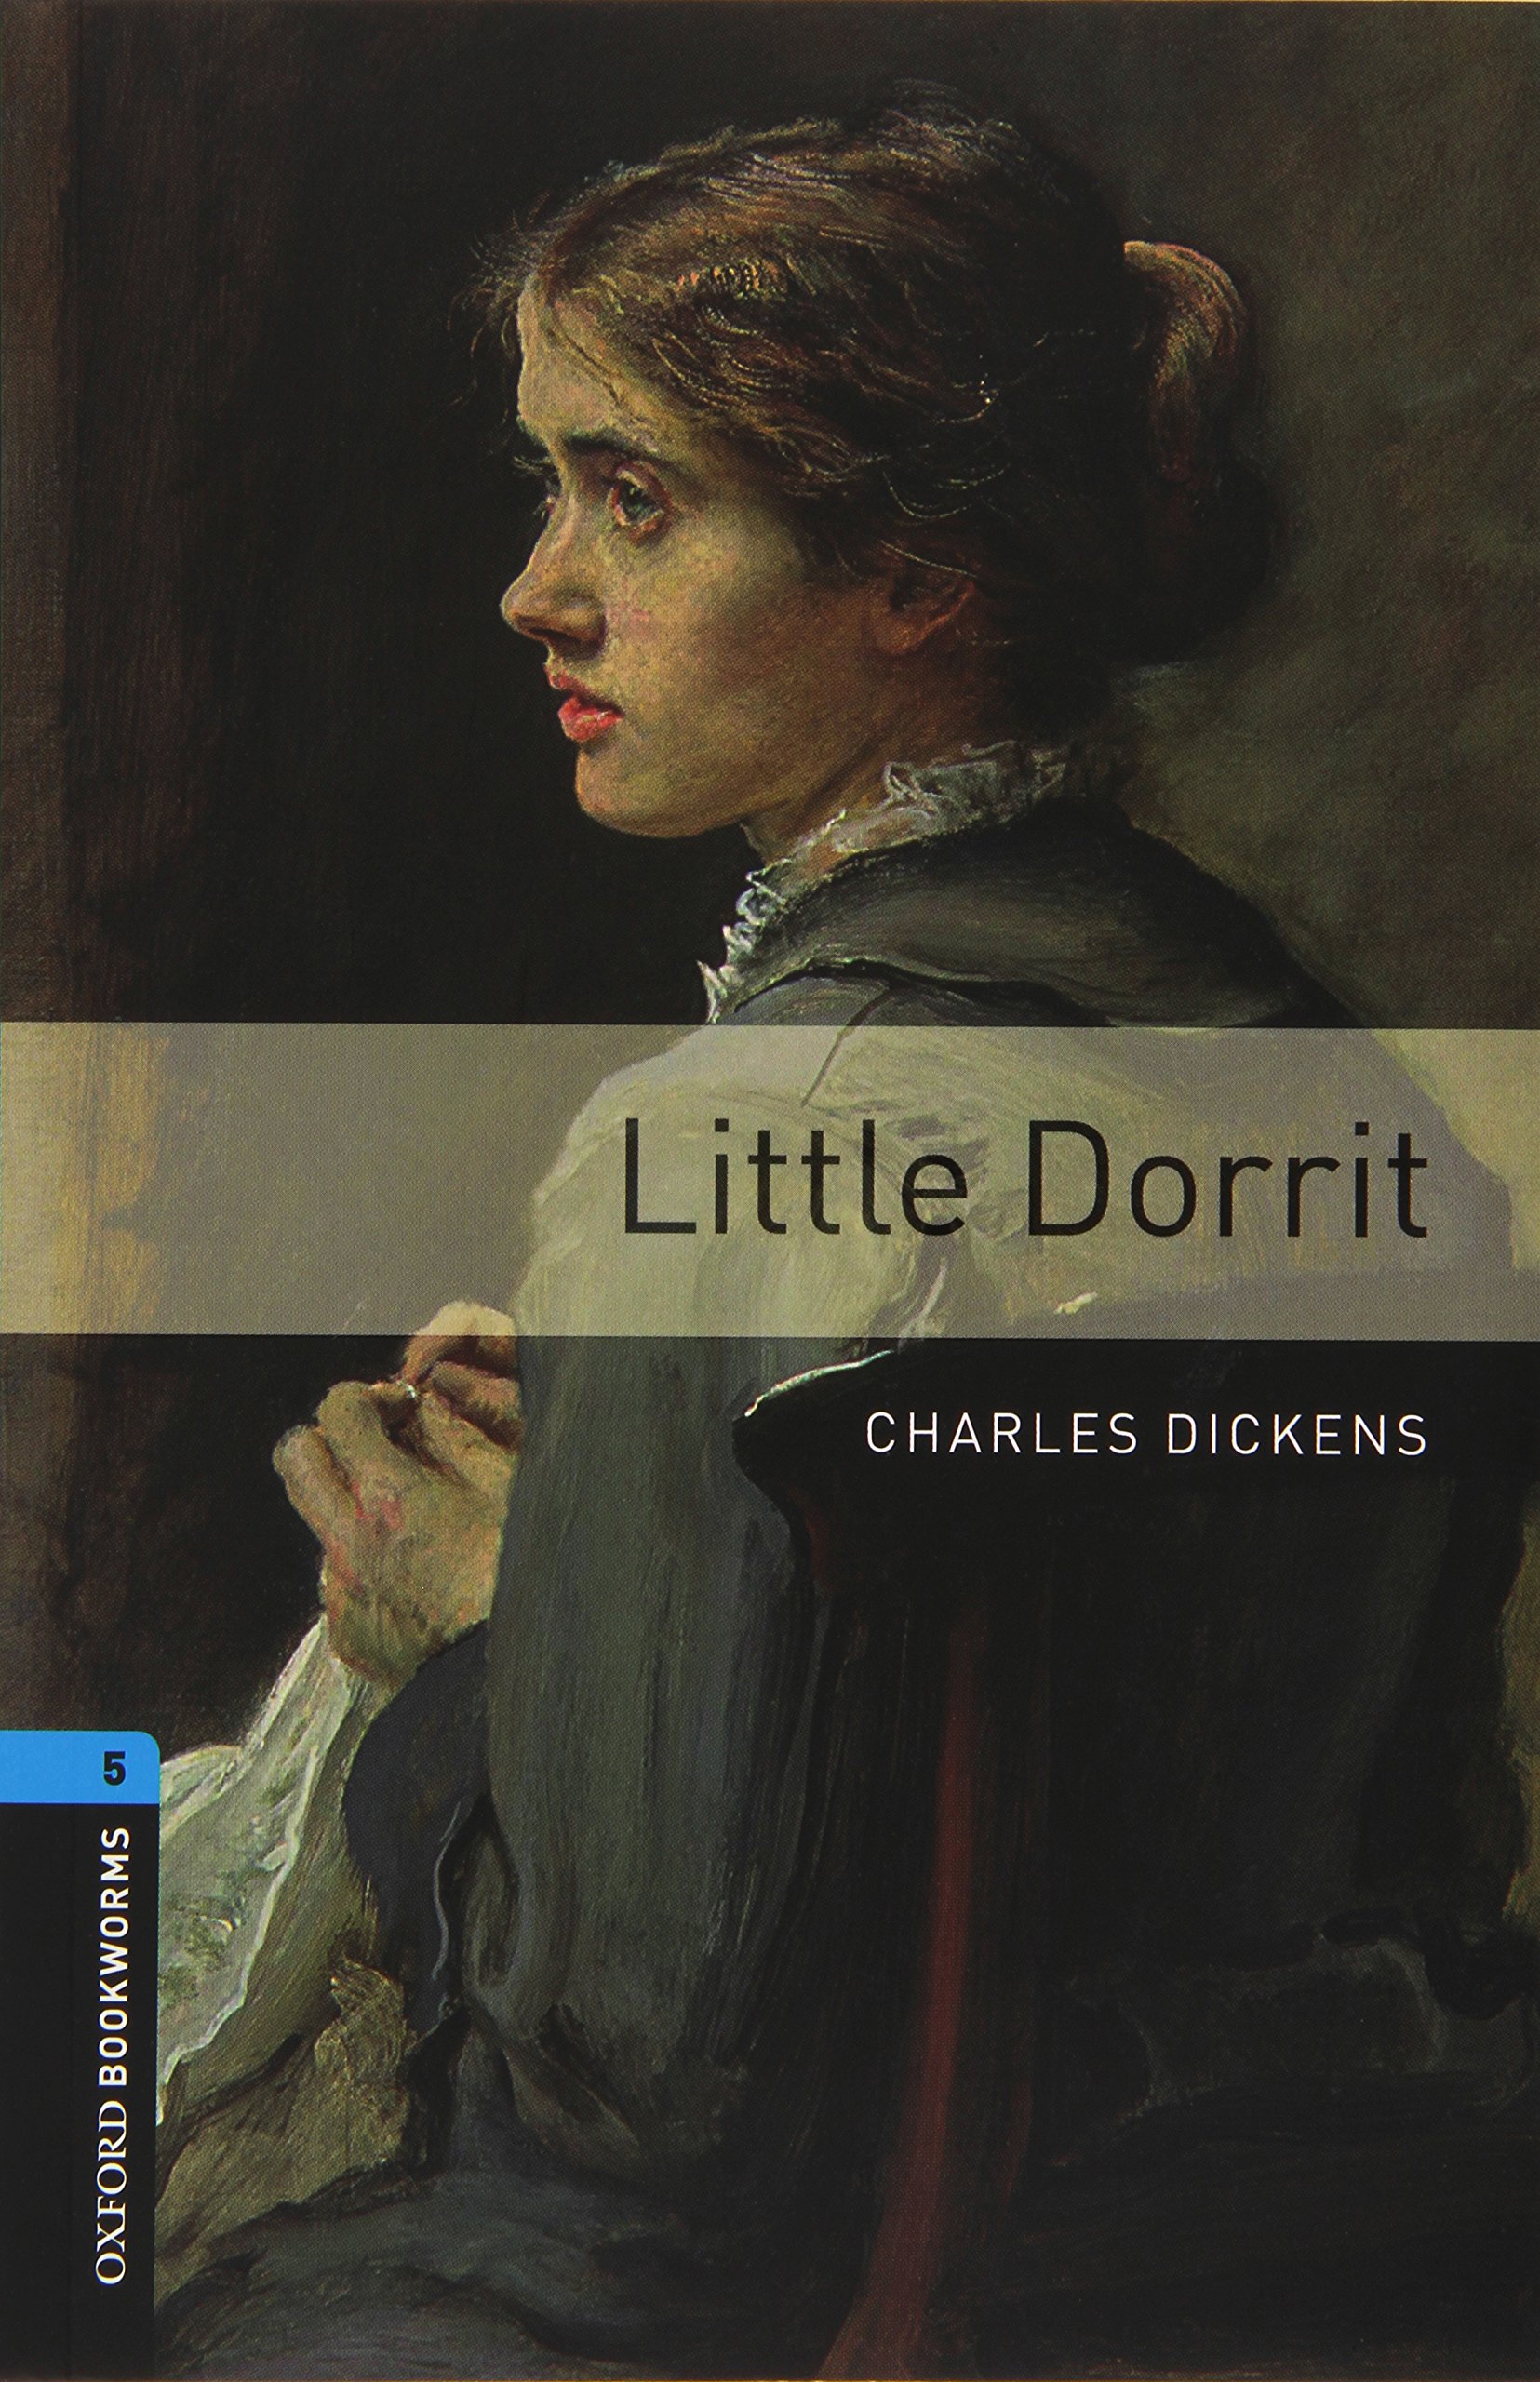 Bookworm library. Oxford bookworms Library. Little Dorrit book. Oxford bookworms Library уровни. Oxford bookworms Library Levels.